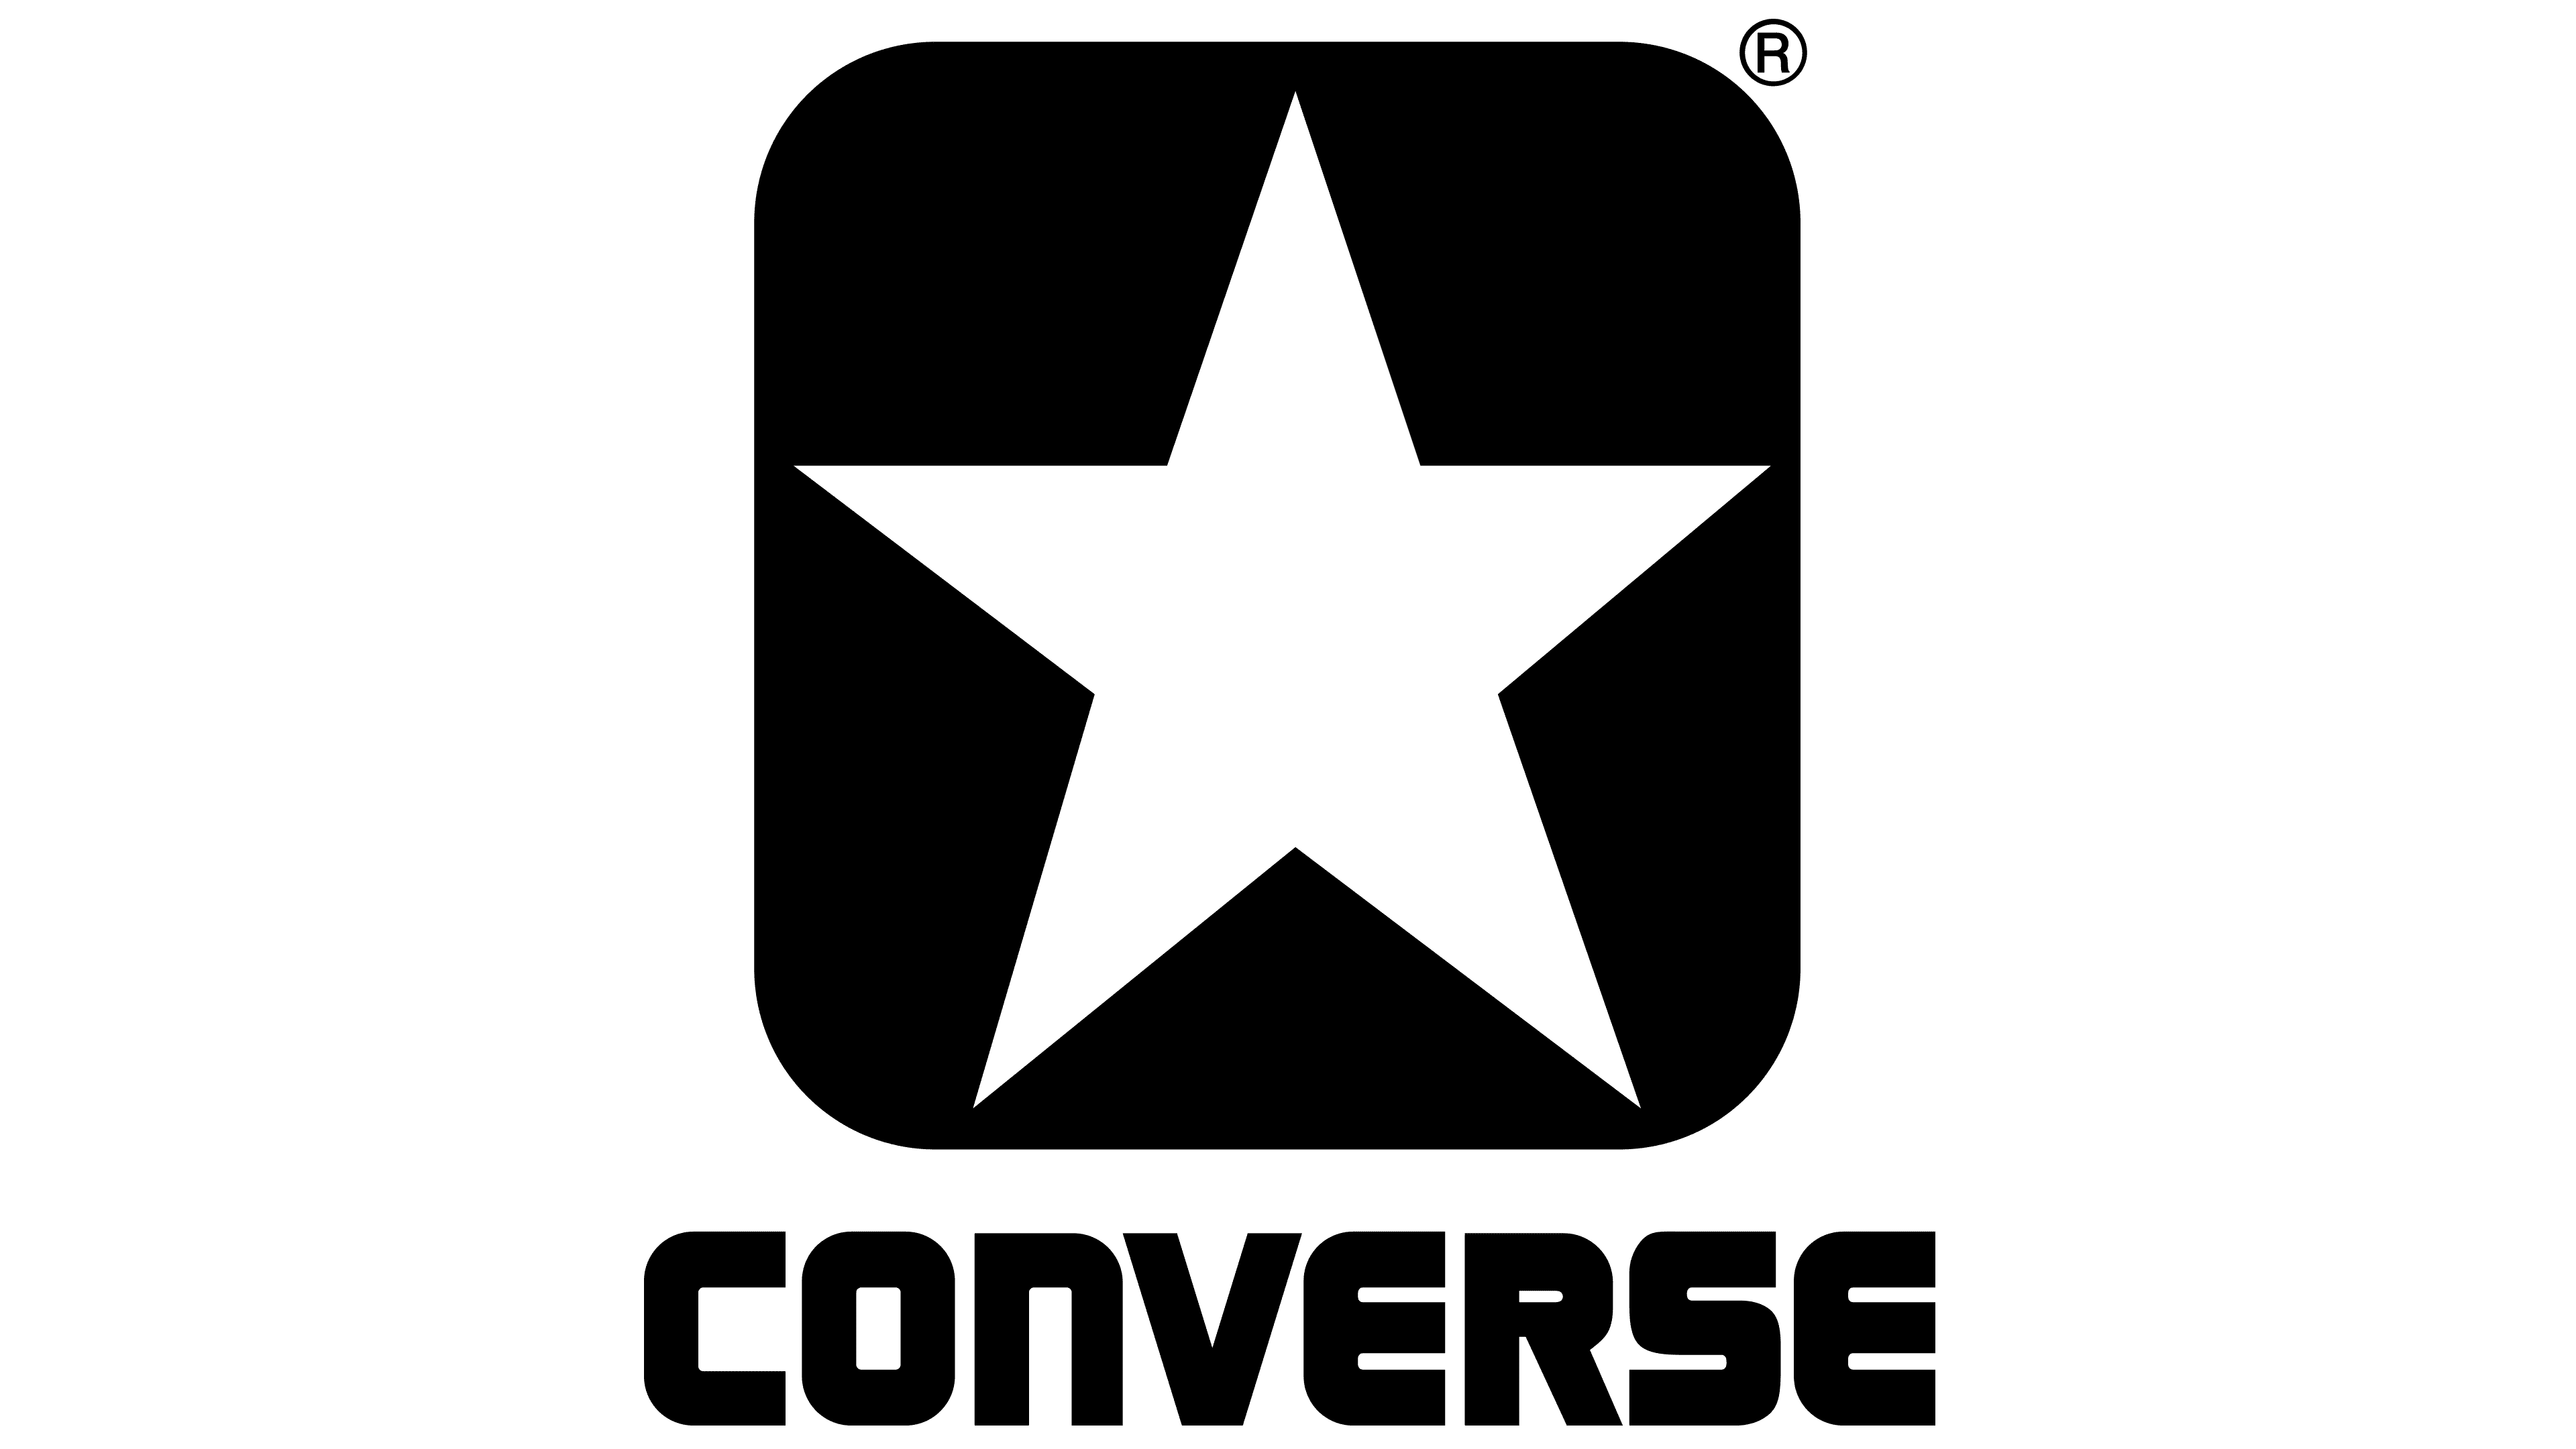 converse all star logo meaning